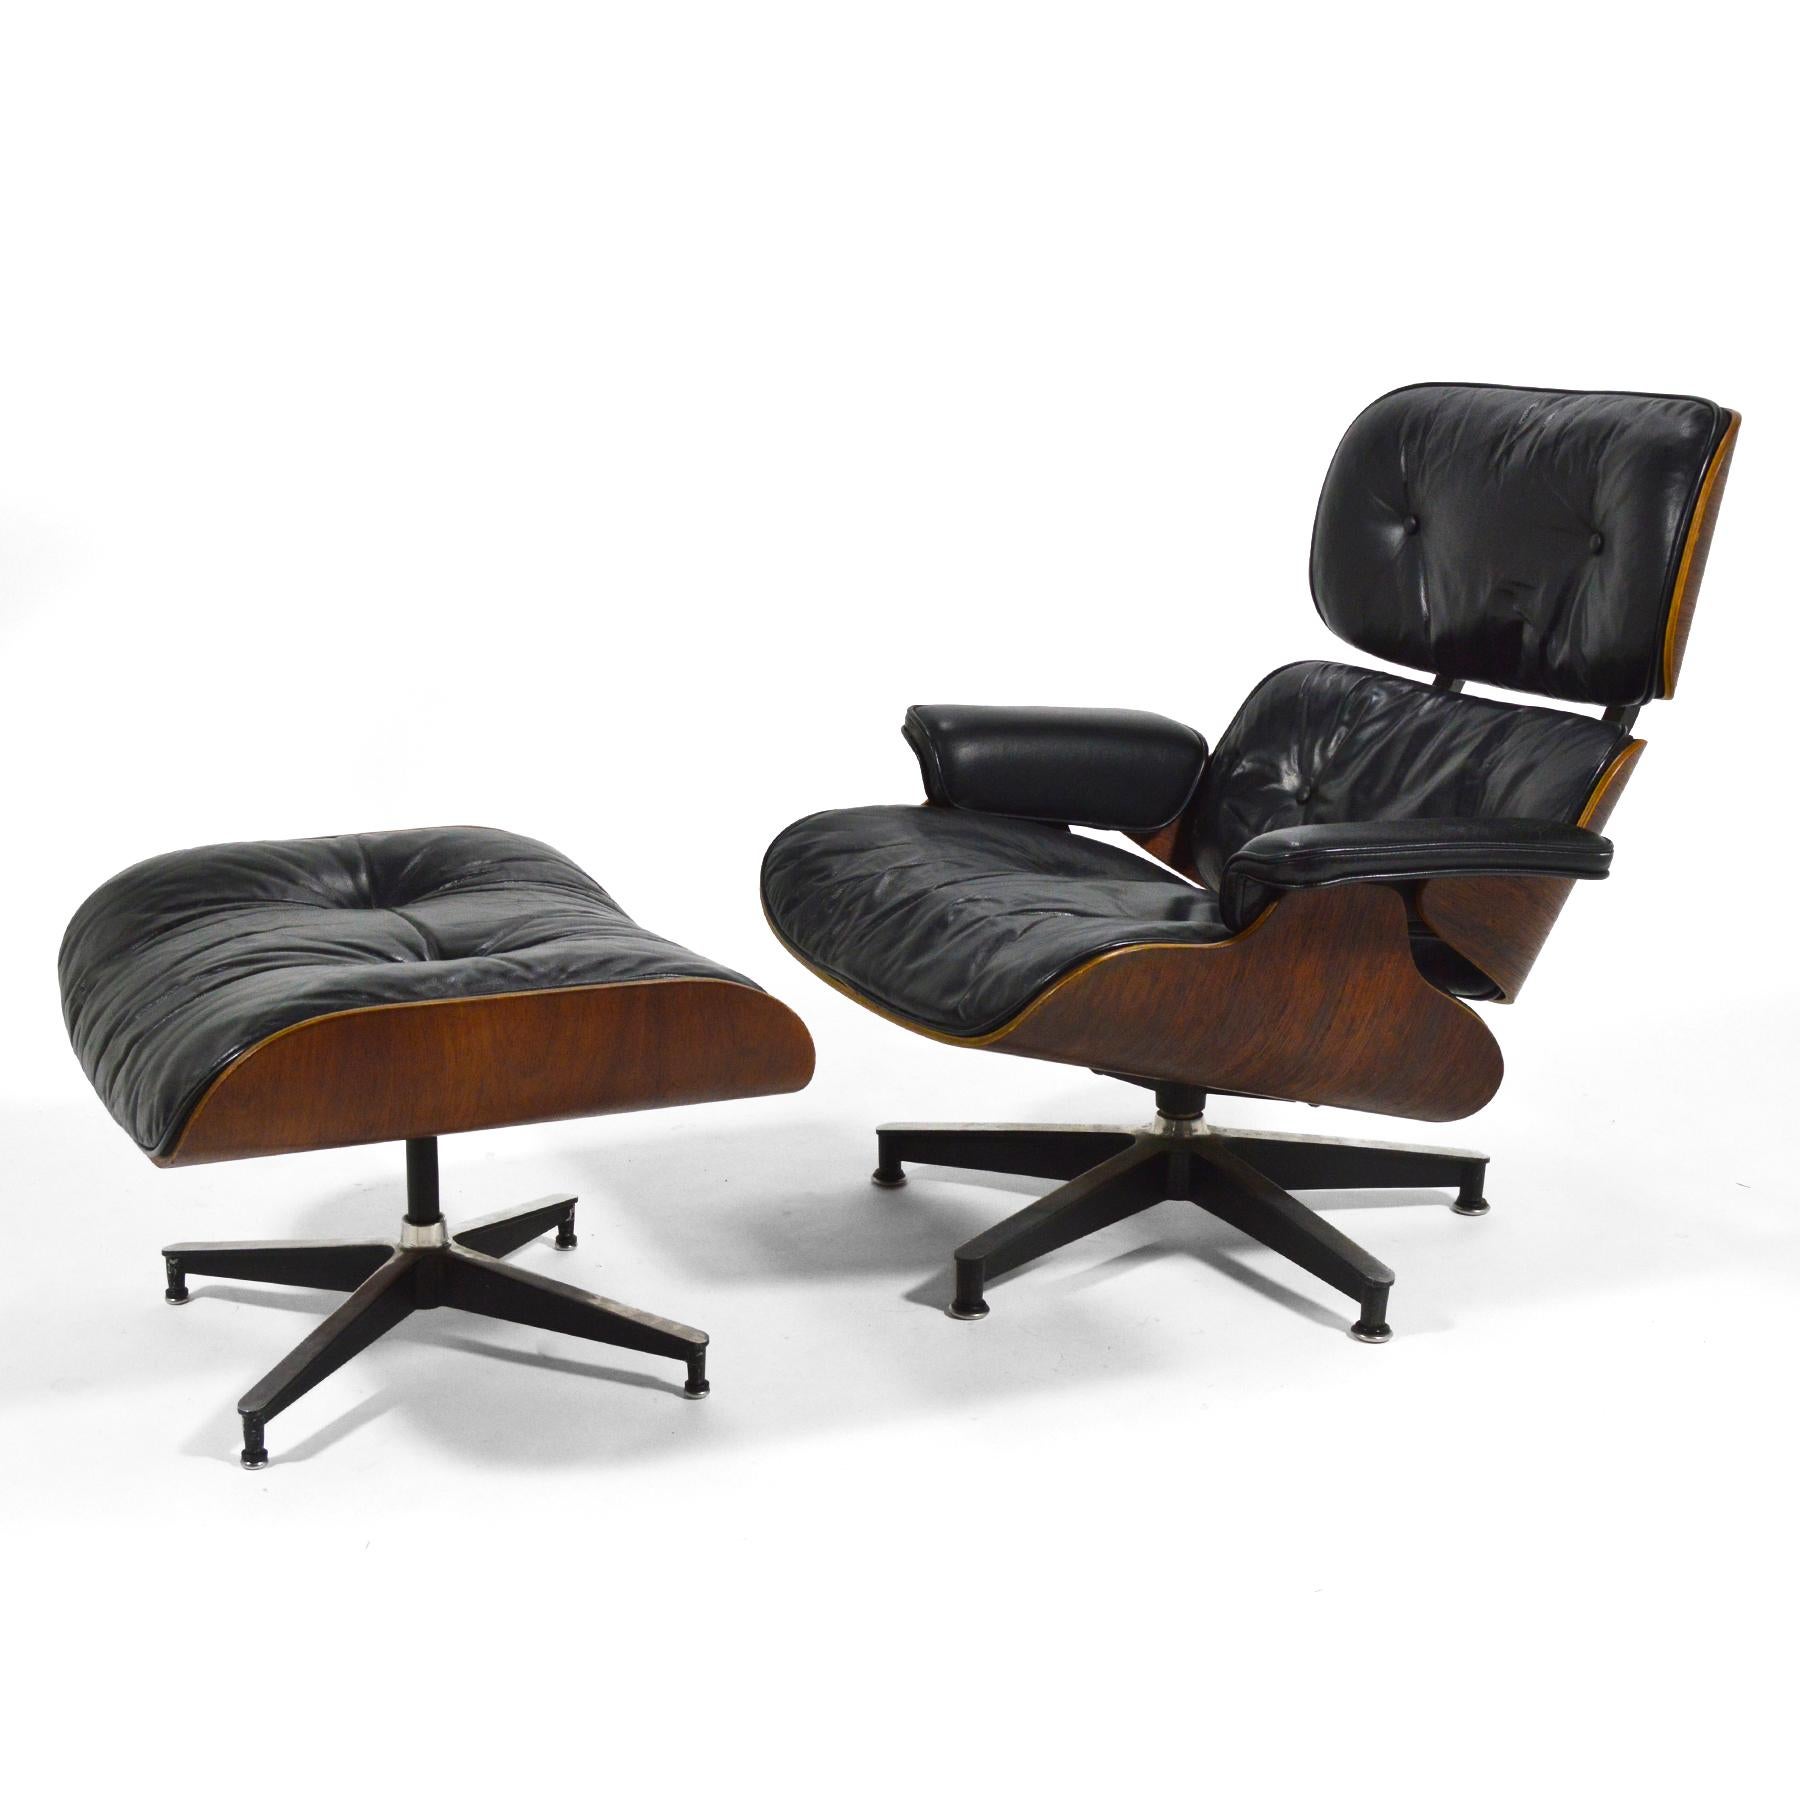 An exceptional early example of the iconic design by Charles and Ray Eames with great provenance, this 670 lounge chair and matching 671 ottoman is entirely original. It features down-filled cushions, rosewood shells, rubber spacers, and has a